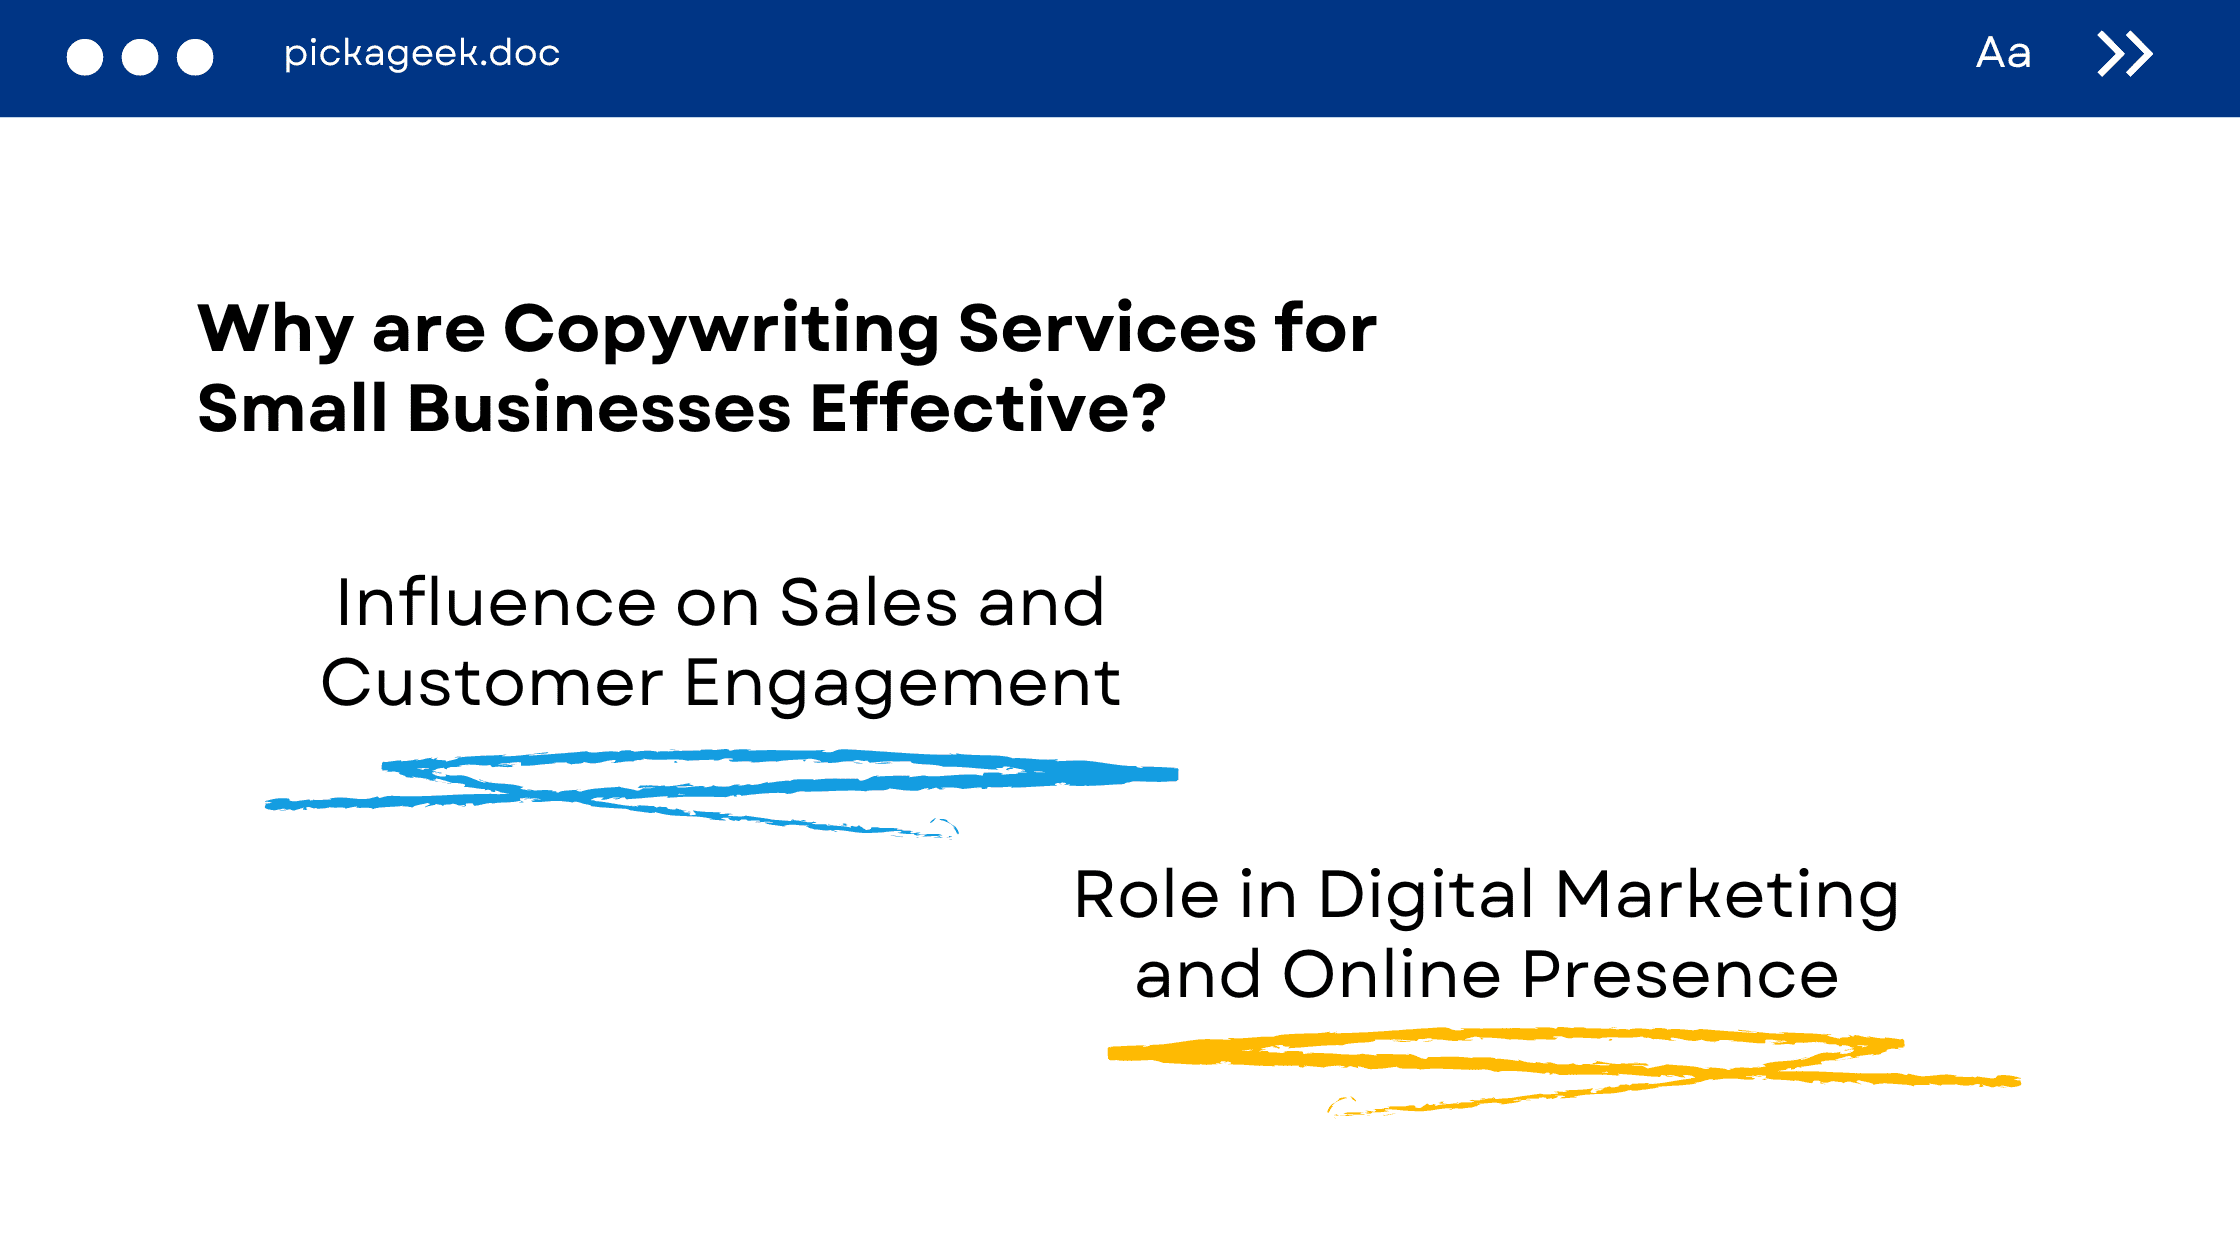 Why are Copywriting Services for Small Businesses Effective?